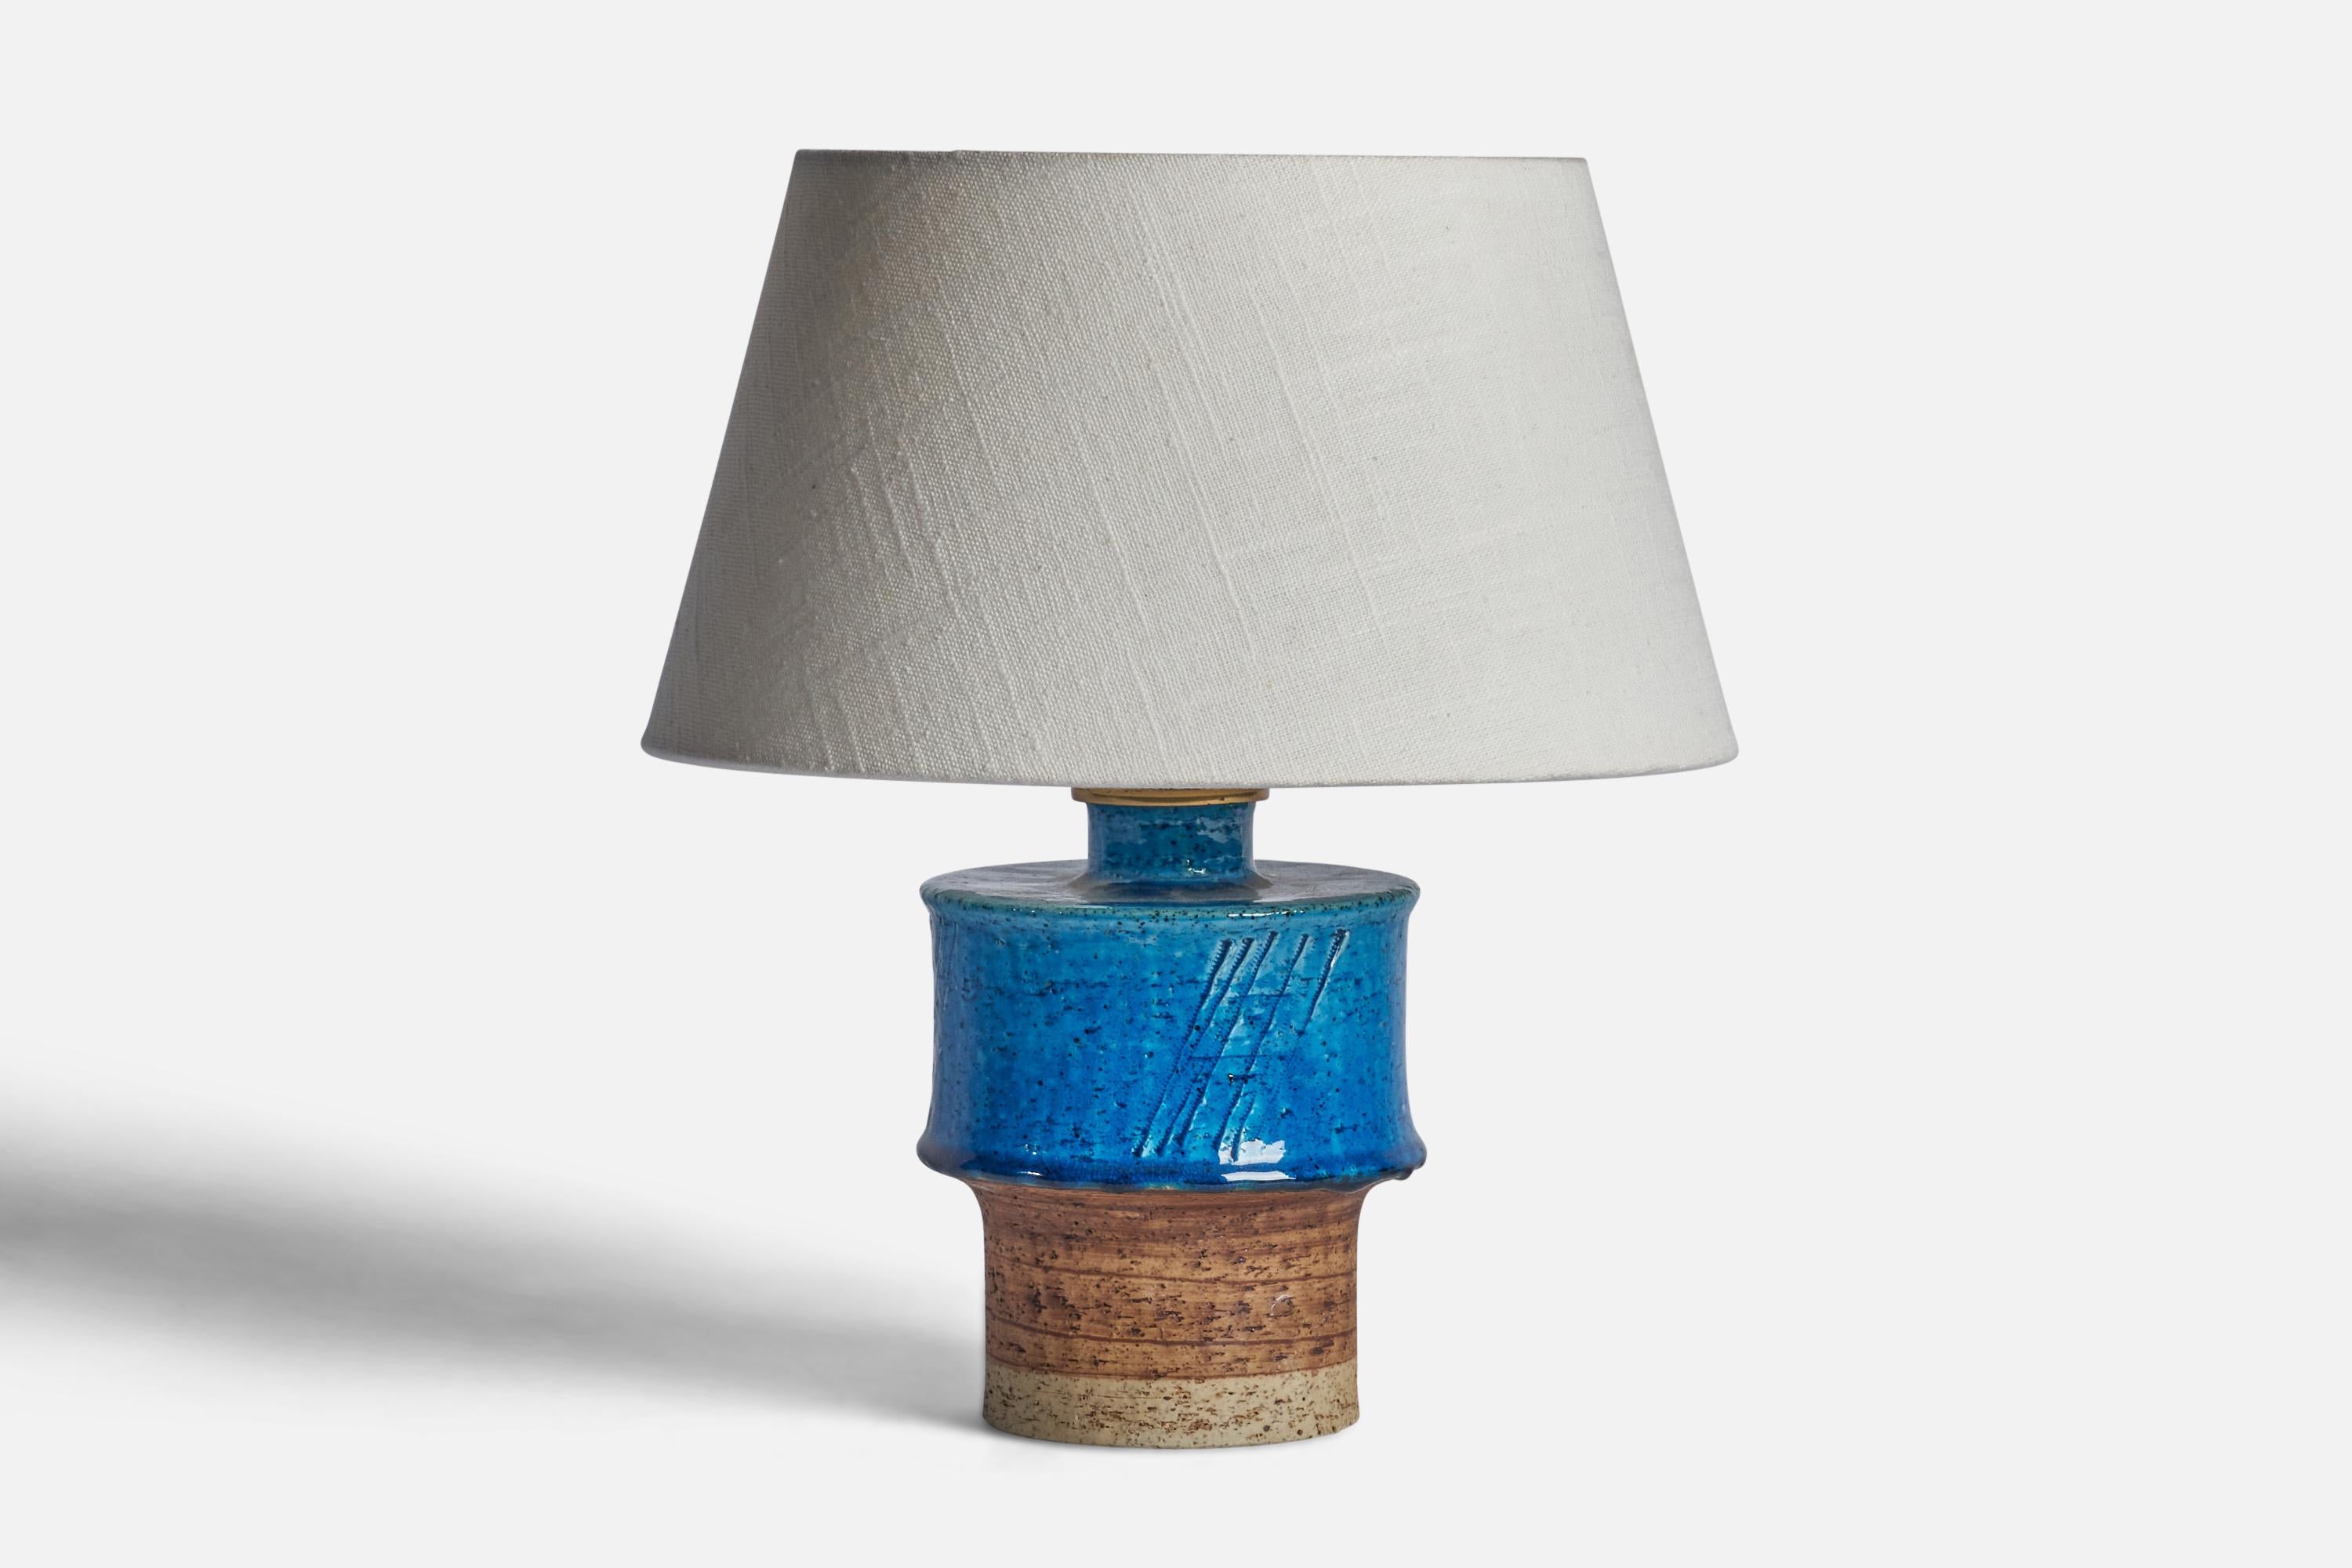 A brown and blue-glazed stoneware table lamp designed by Inger Persson and produced by Rörstrand, Sweden, 1960s.

Dimensions of Lamp (inches): 8.25” H x 4.5” Diameter
Dimensions of Shade (inches): 7” Top Diameter x 10” Bottom Diameter x